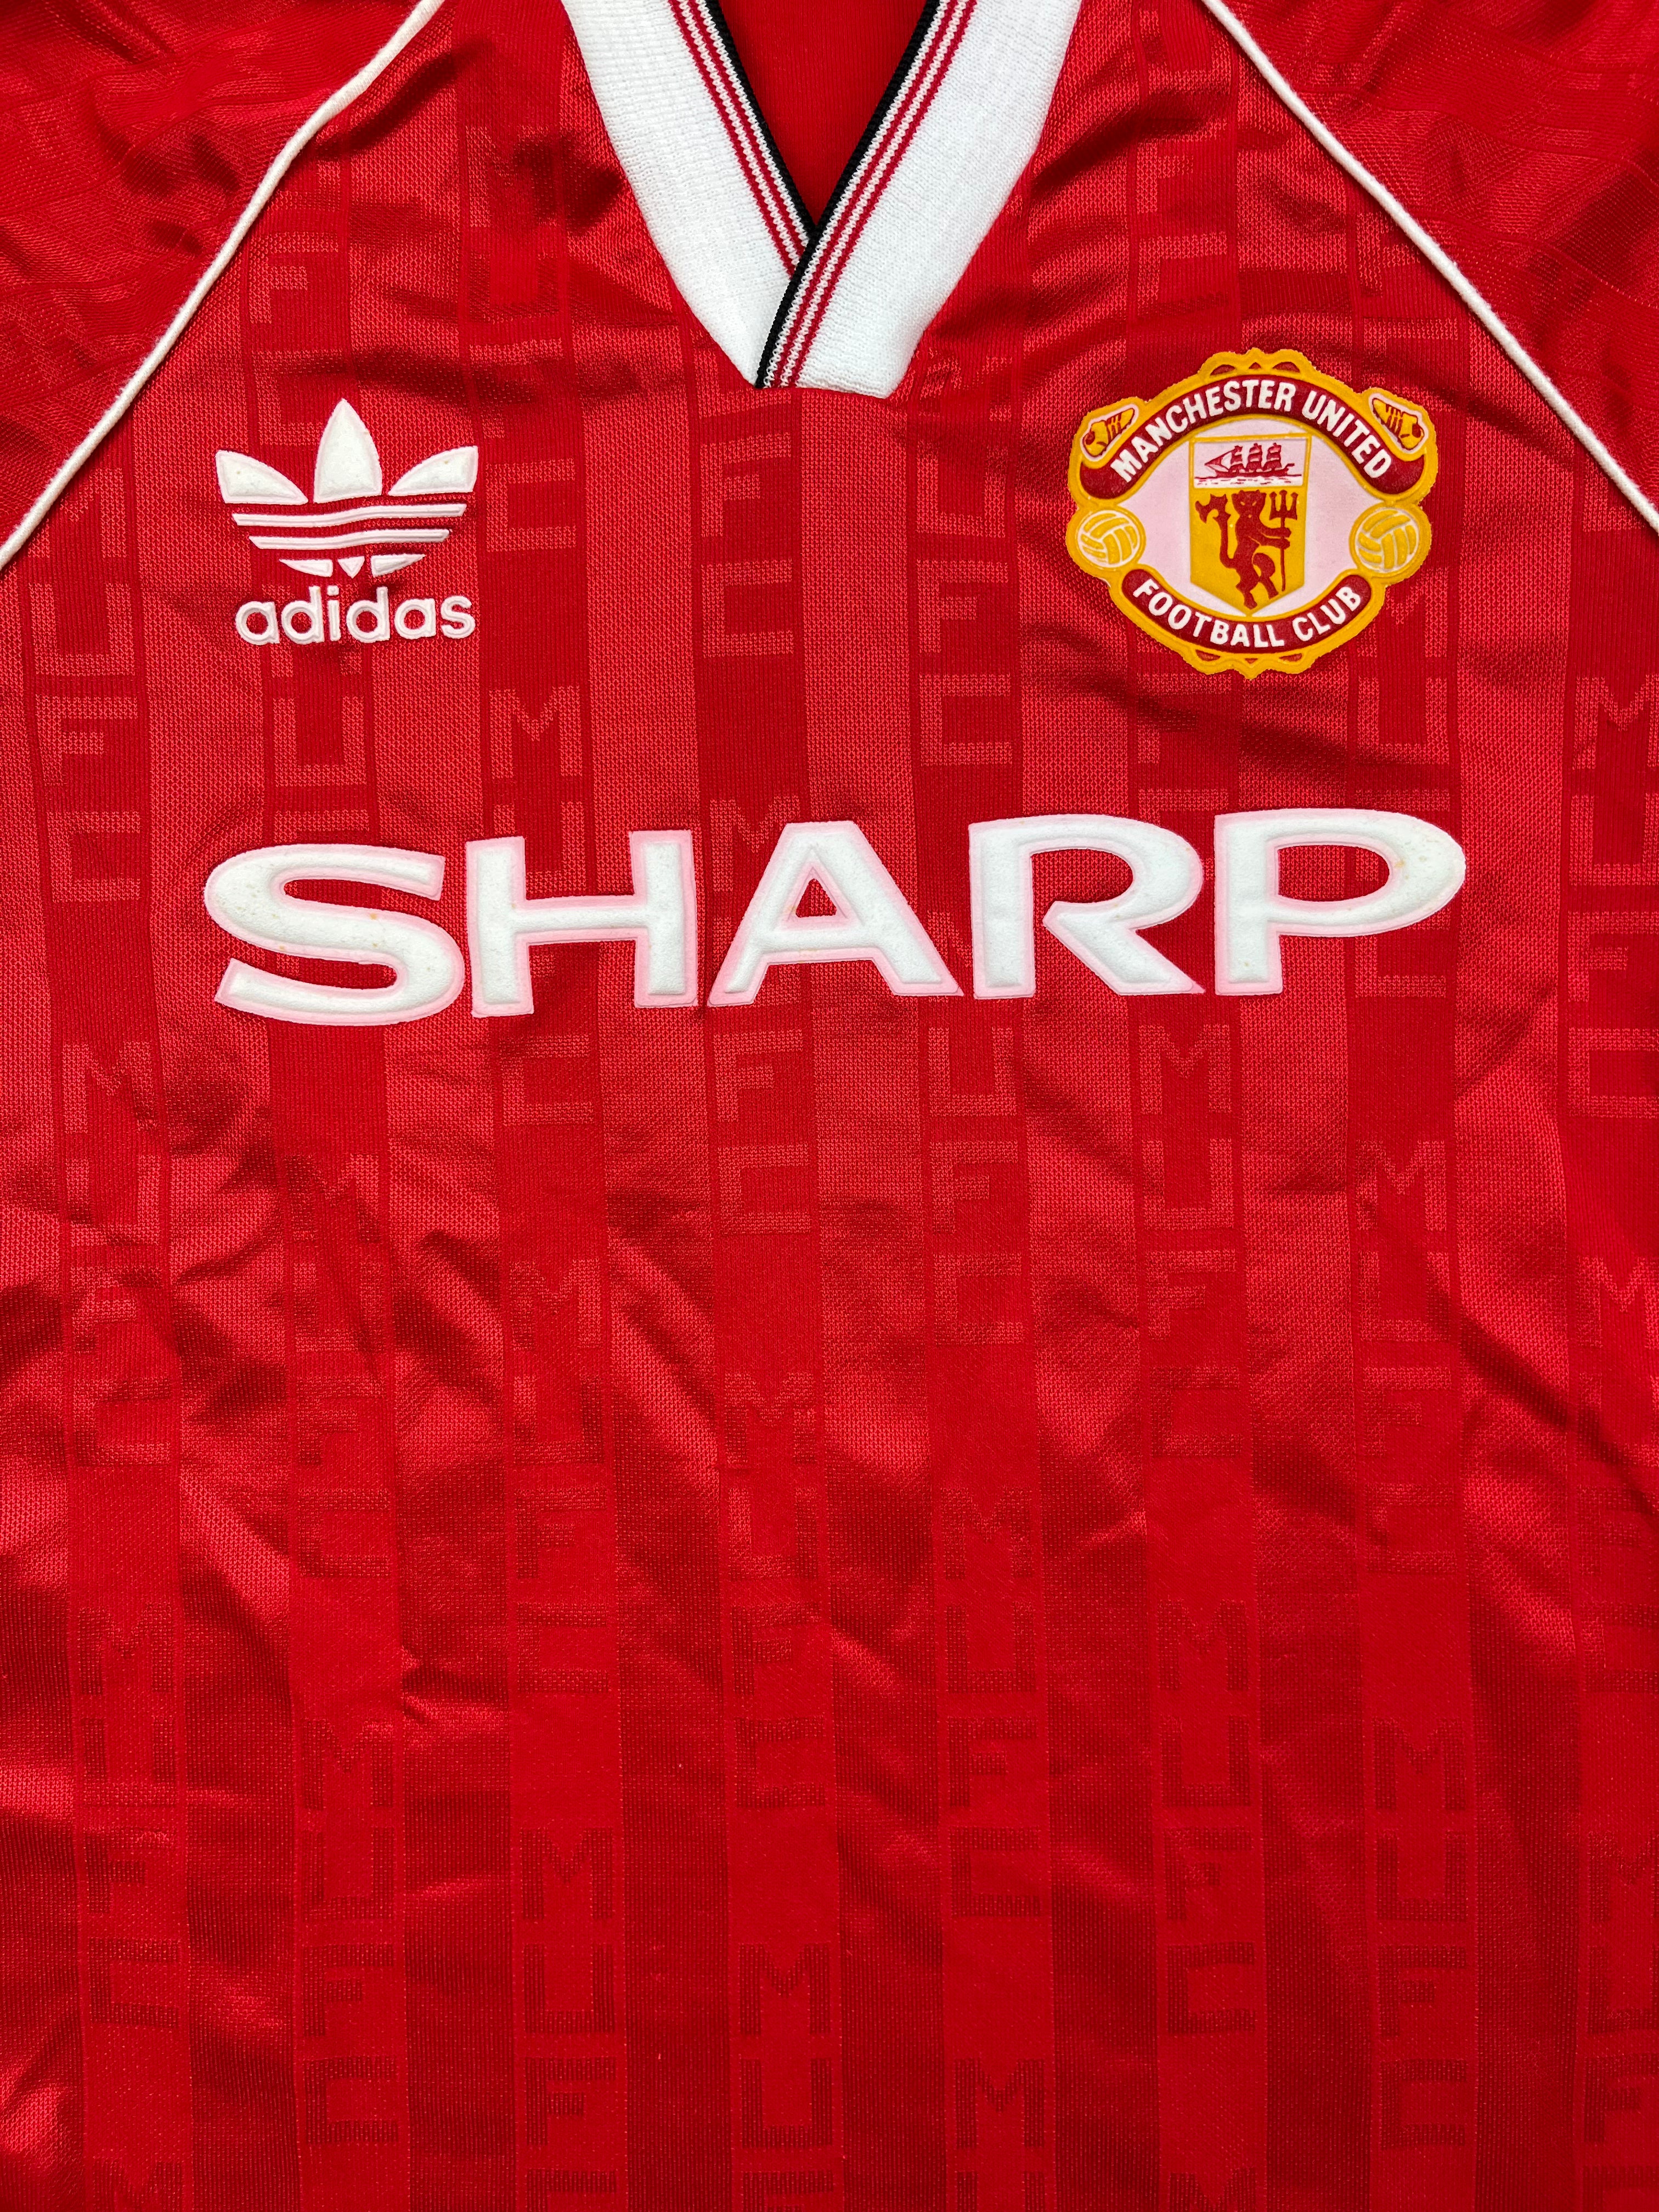 1988/90 Manchester United Home Shirt (Y) 8.5/10